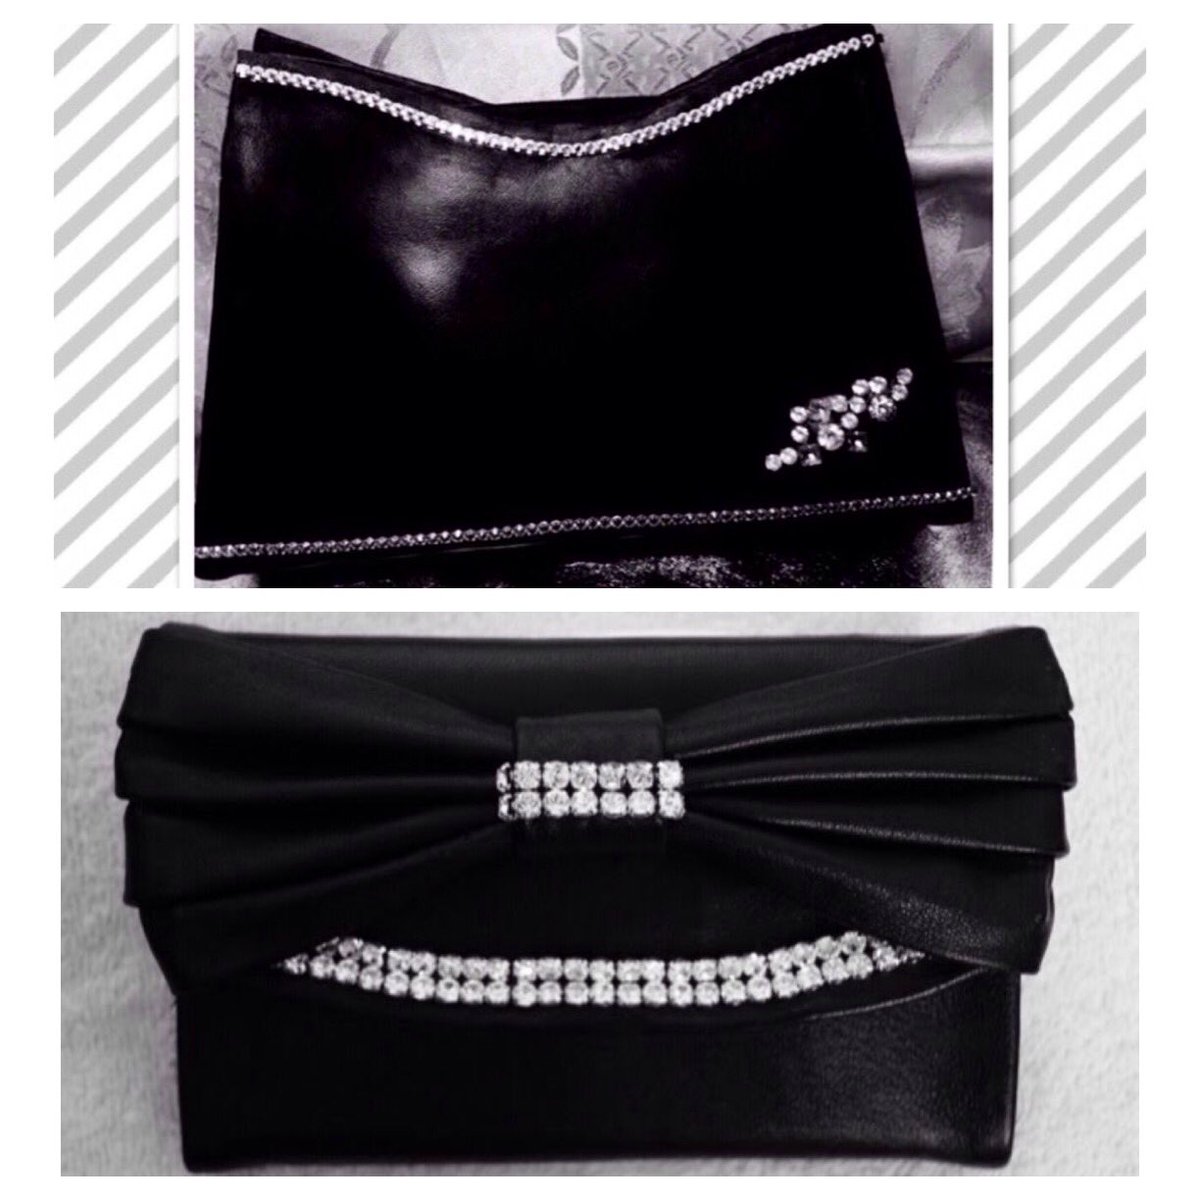 #Coolx # pure leather and Swarovski crystal # designer # pretty designs # wallet and clutch